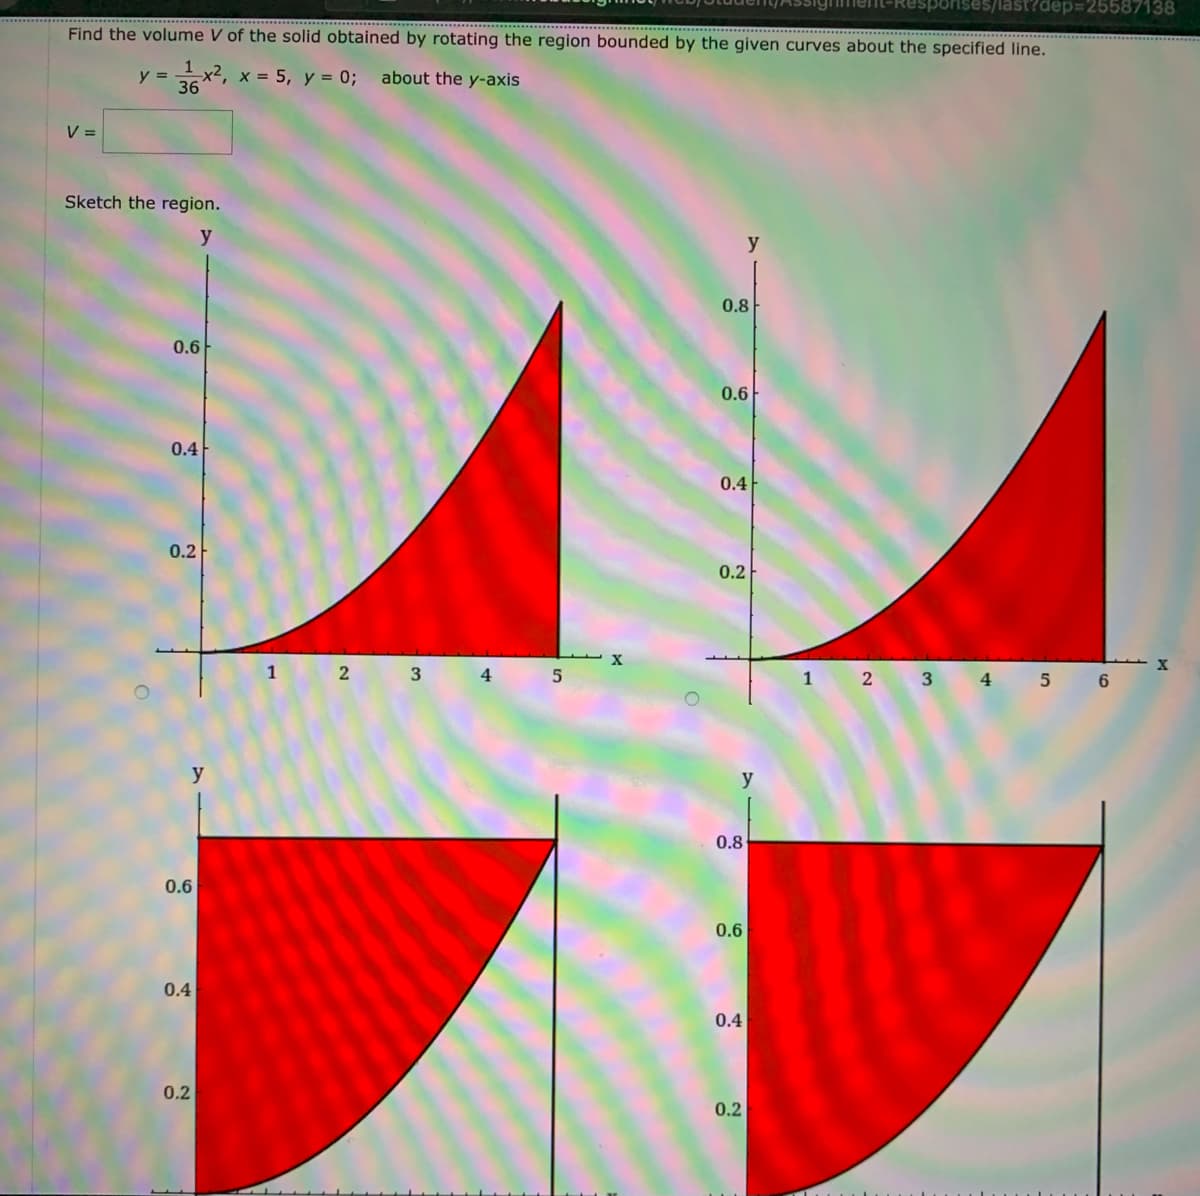 last?dep=25587138
Find the volume V of the solid obtained by rotating the region bounded by the given curves about the specified line.
1
x2, x = 5, y = 0;
36
y =
about the y-axis
V =
Sketch the region.
y
0.8
0.6
0.6
0.4
0.4
0.2
0.2
1
3
4
1
2 3 4
y
0.8
0.6
0.6
0.4
0.4
0.2
0.2
